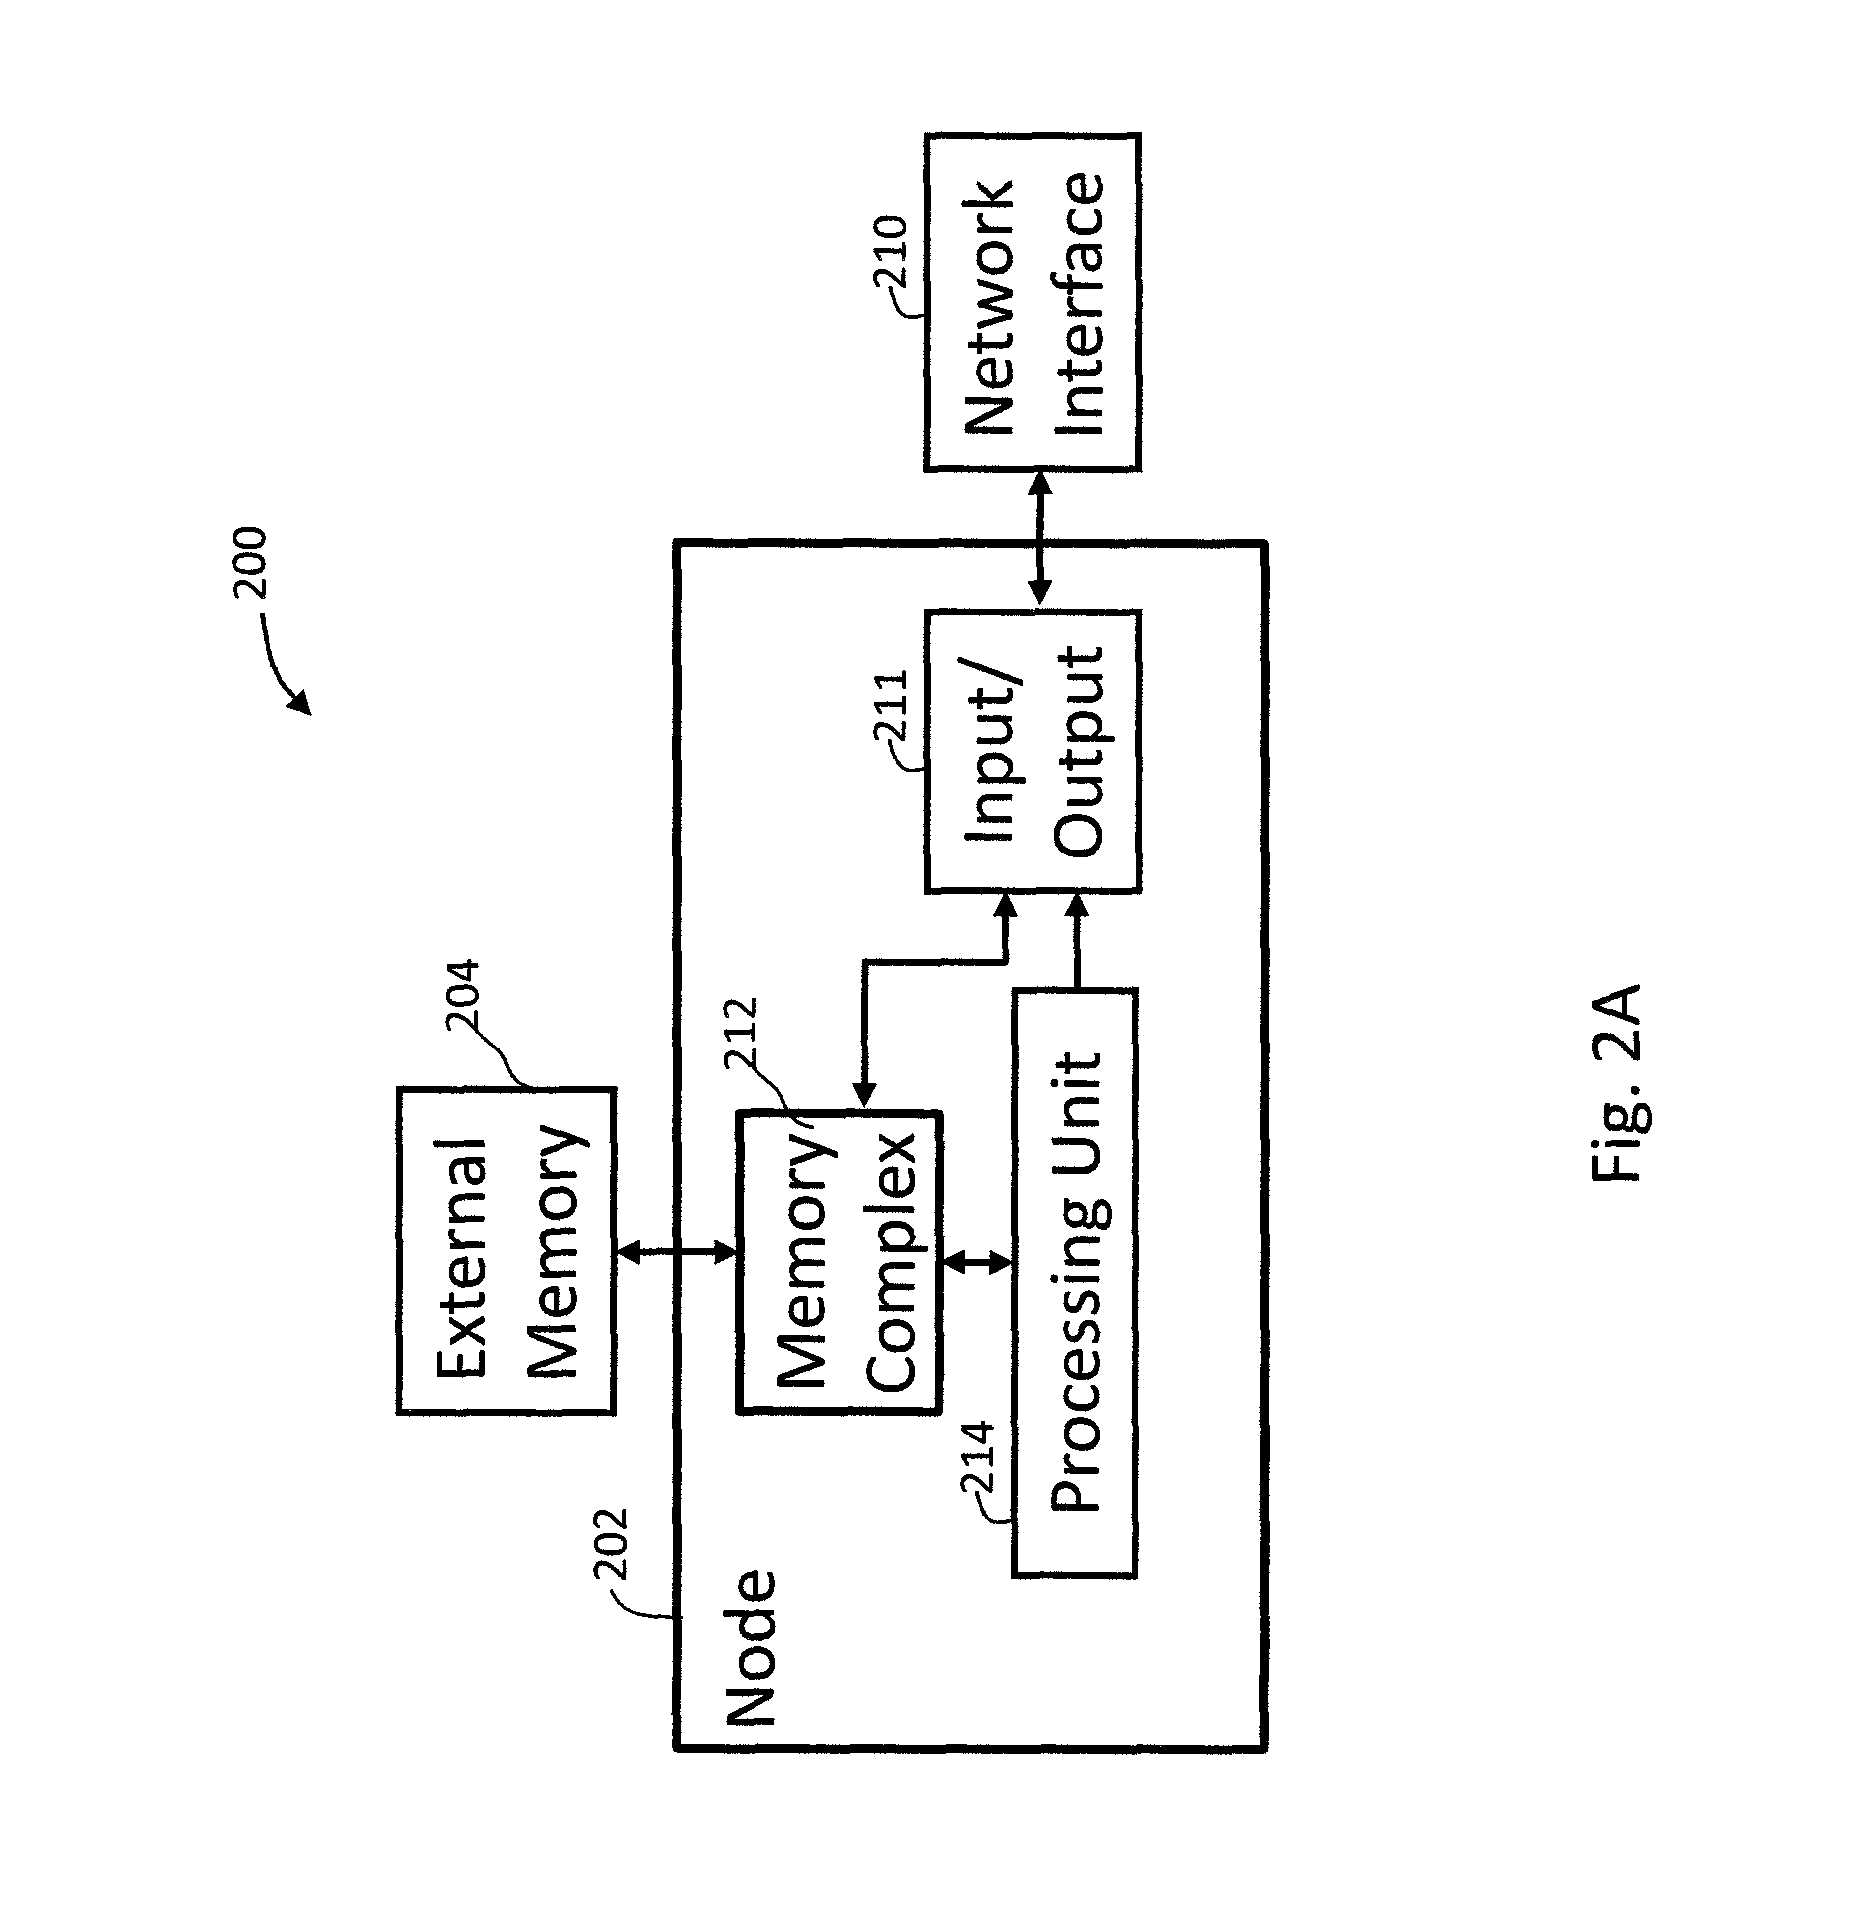 Adaptive private network asynchronous distributed shared memory services